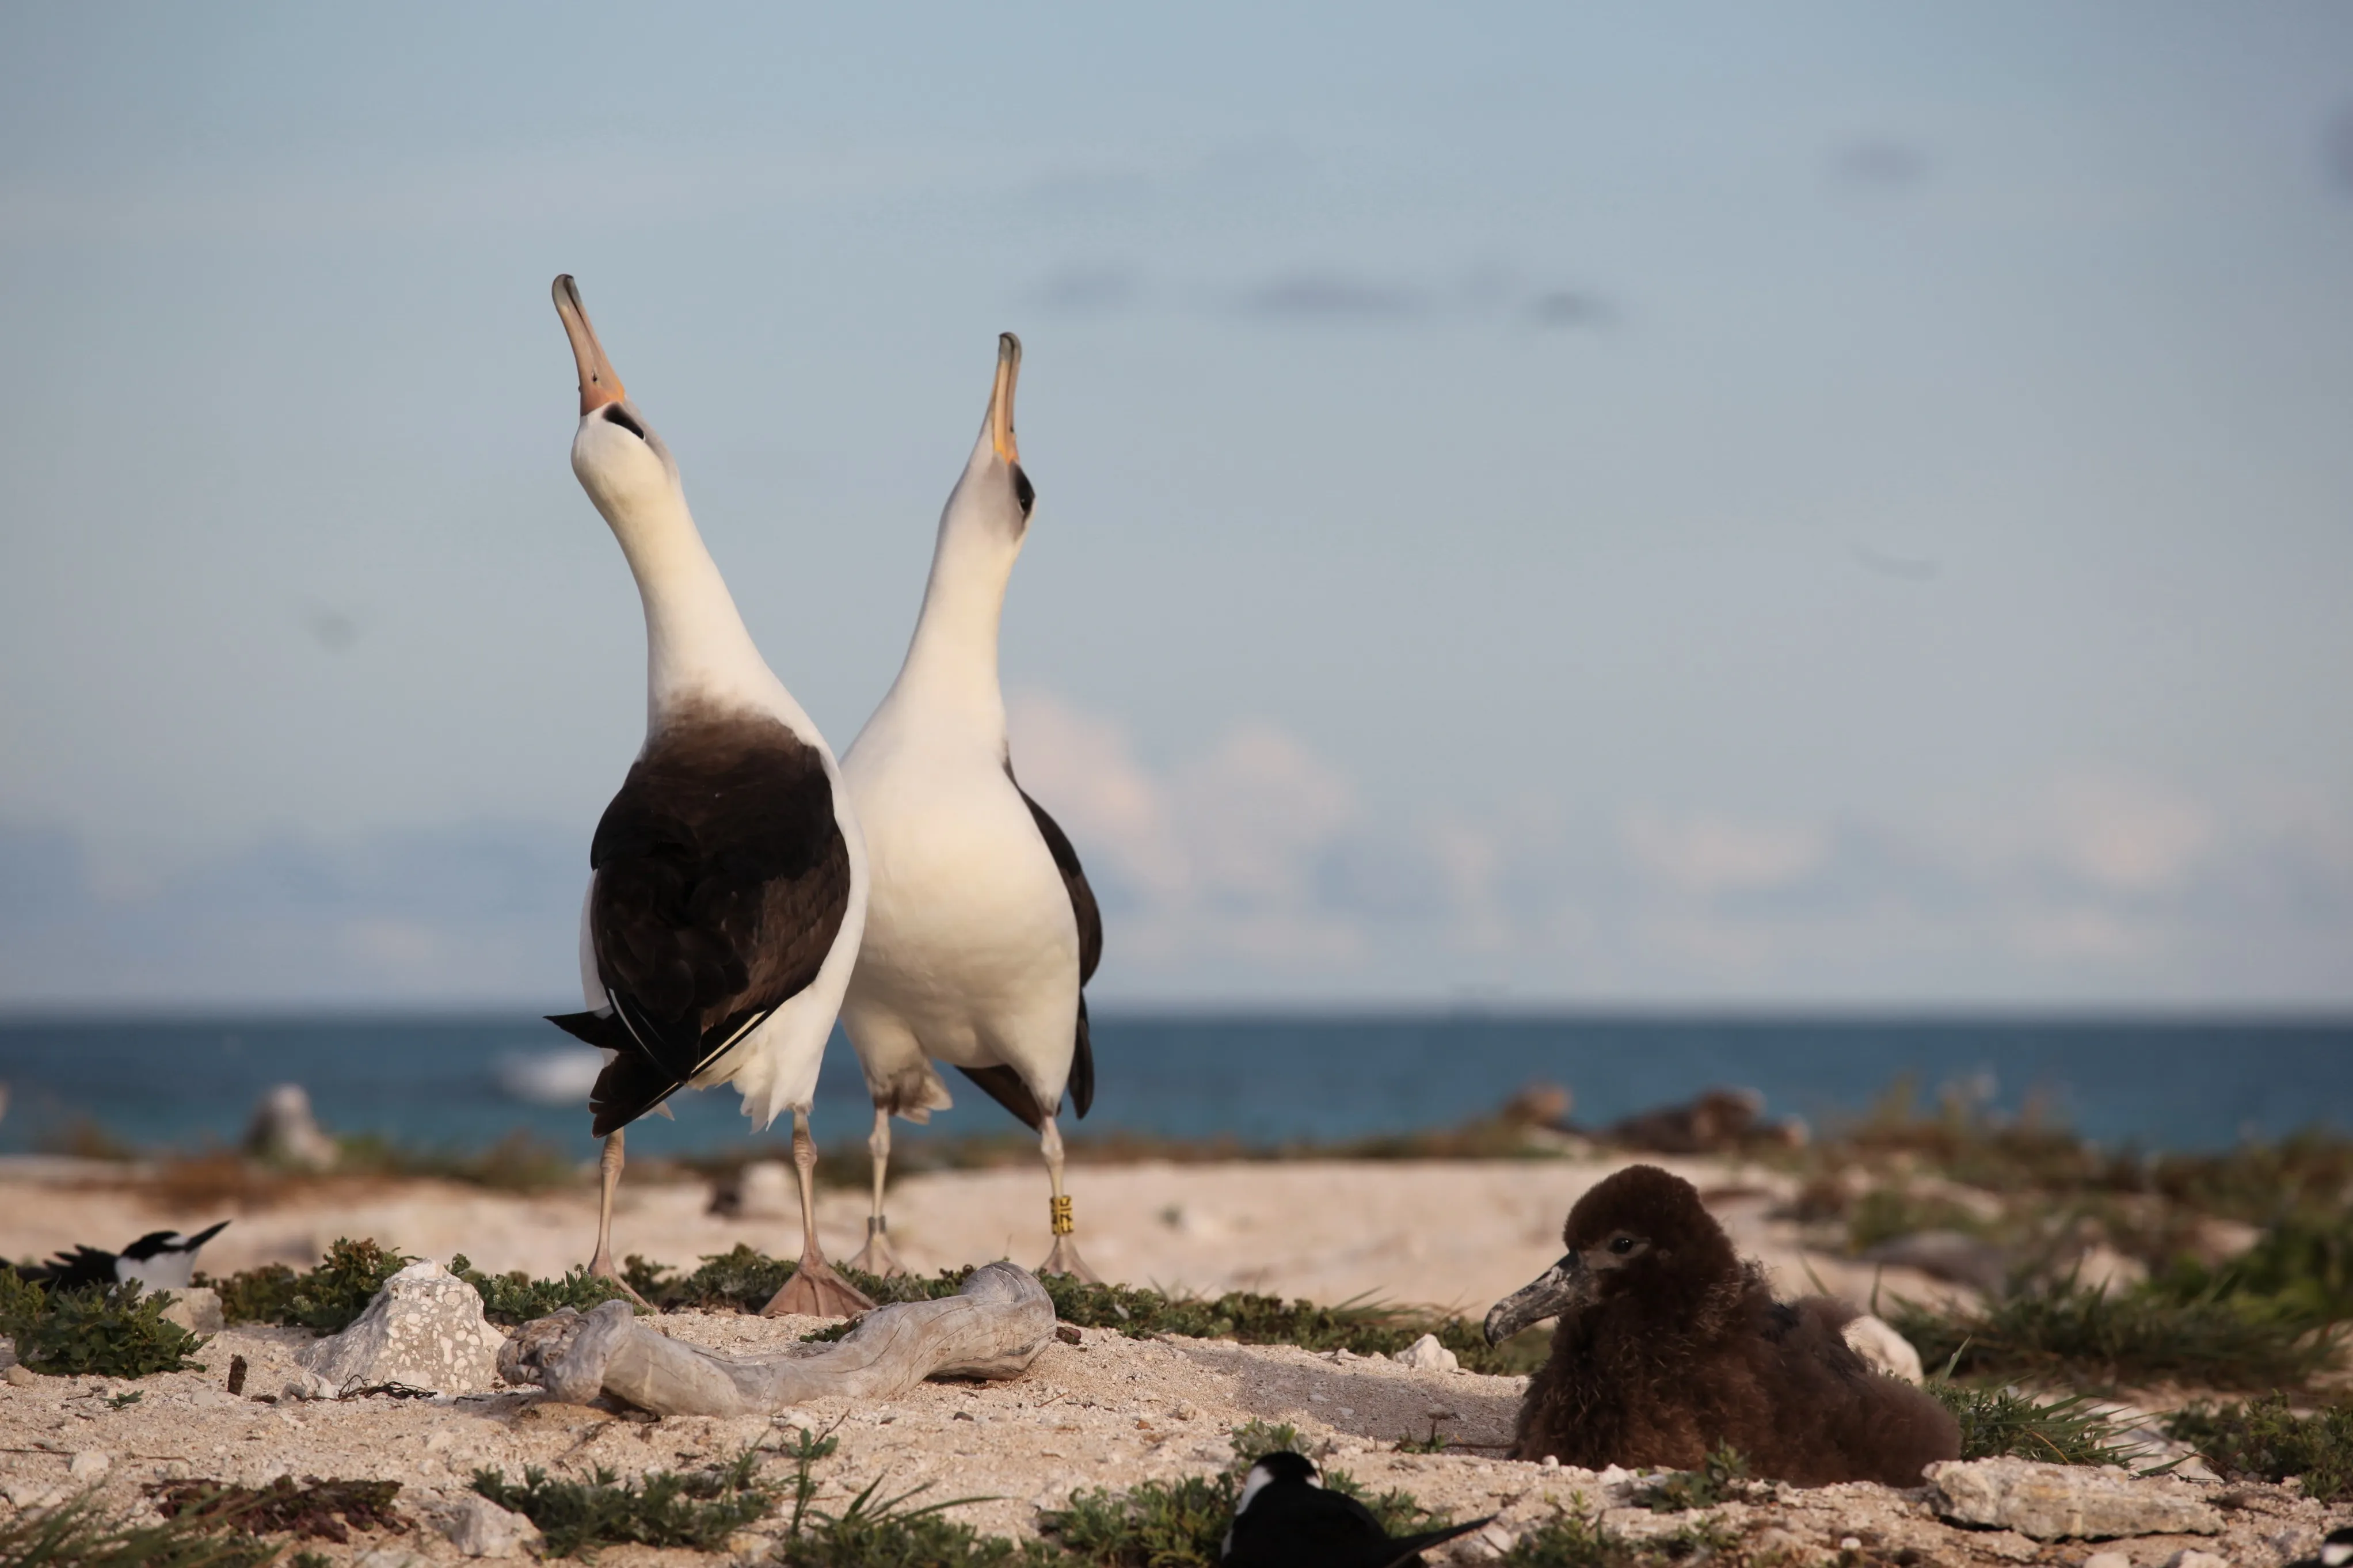 A pair of courting Laysan Albatrosses by the sea in Hawaii.